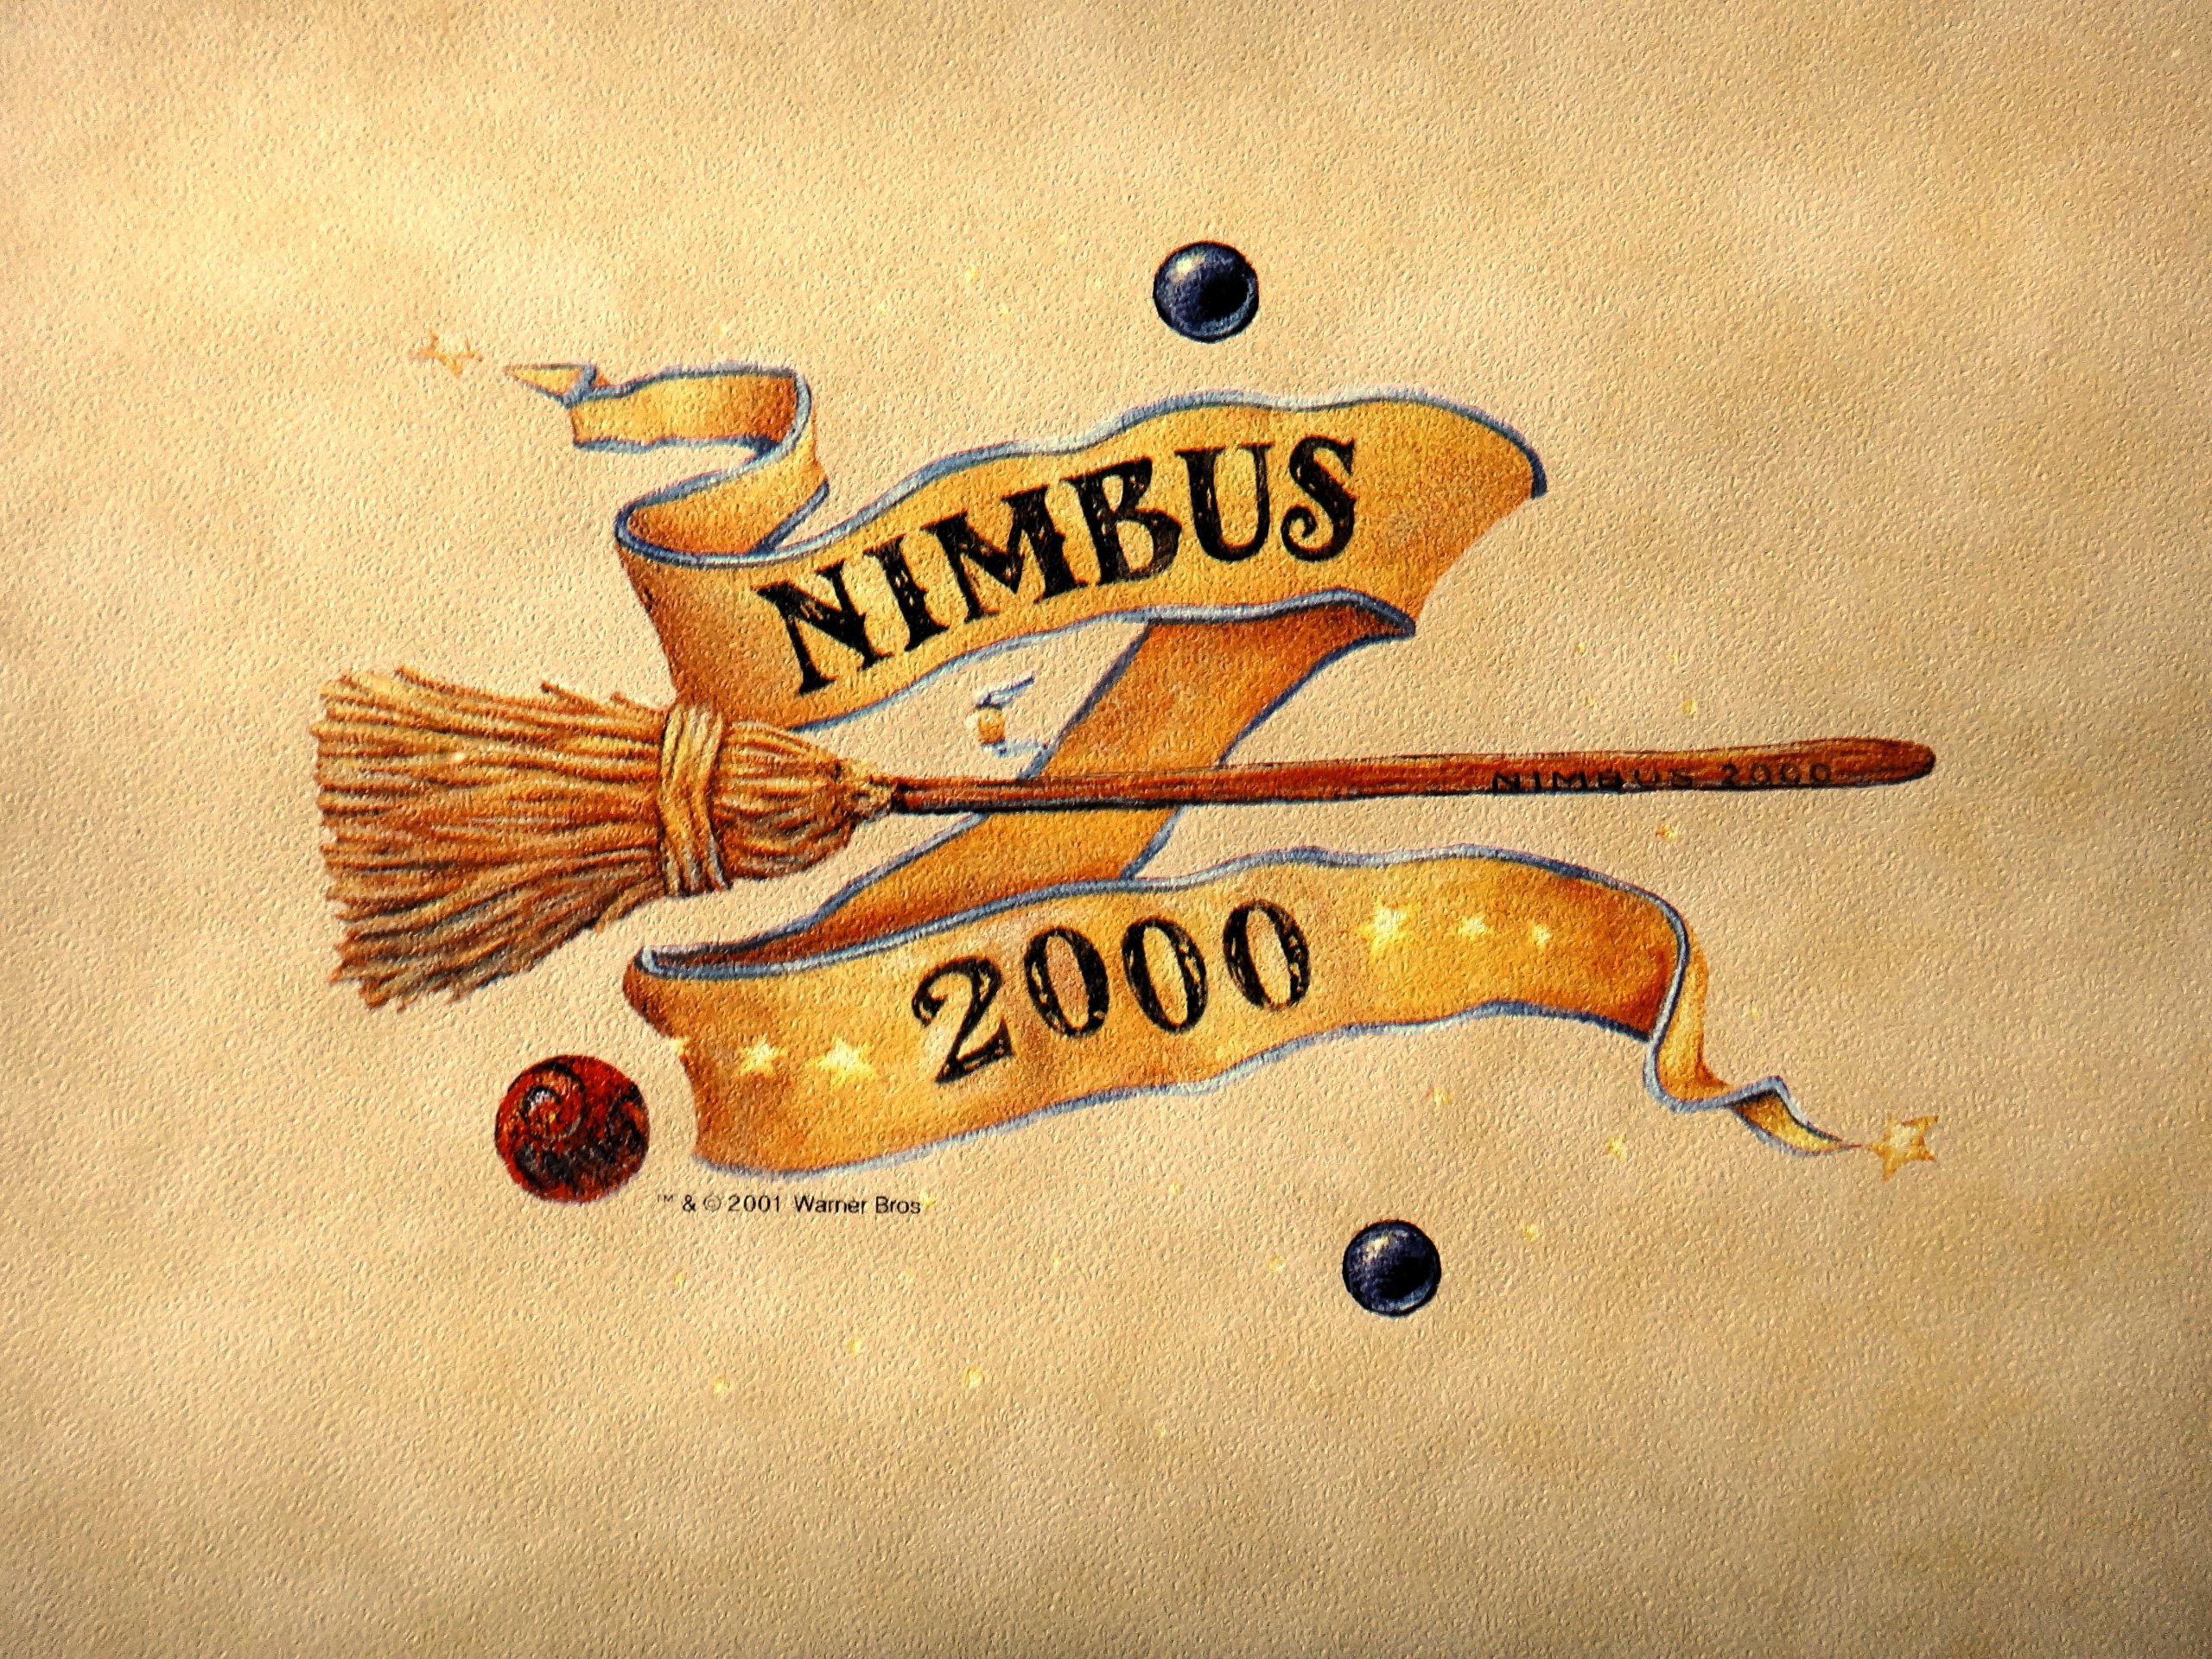 Nimbus Two Thousand & House Crests Harry Potter Official Wallpaper